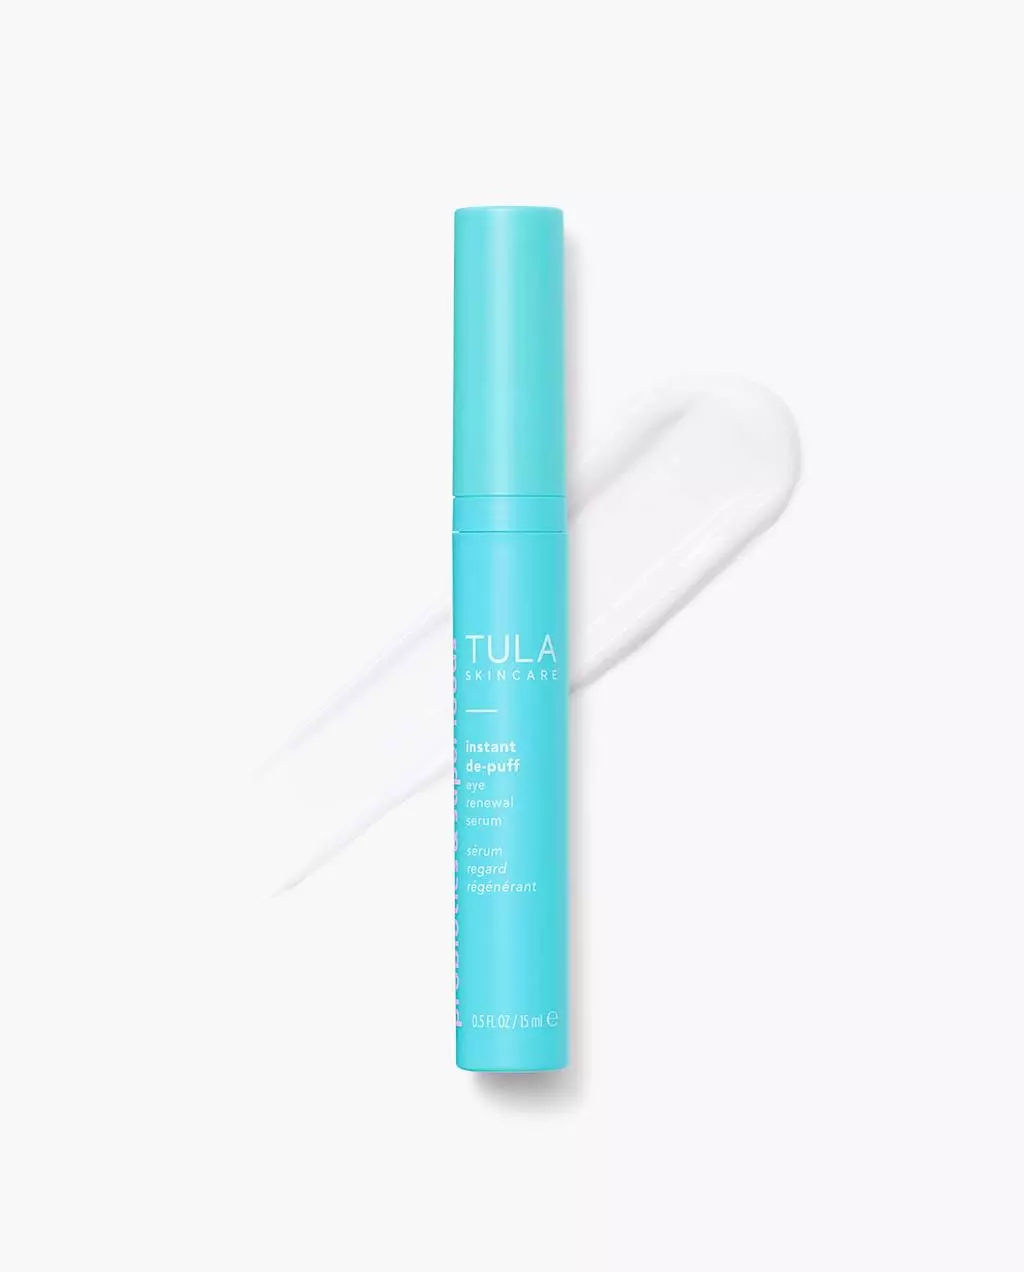 TULA Probiotic Skin Care Instant De-Puff Multi-Spectrum Eye Renewal Serum (Travel-Size) | Dark Circles Under Eye Treatment, Contains Caffeine to Reduce Puffiness and Signs of Wrinkles | 0.25 fl oz